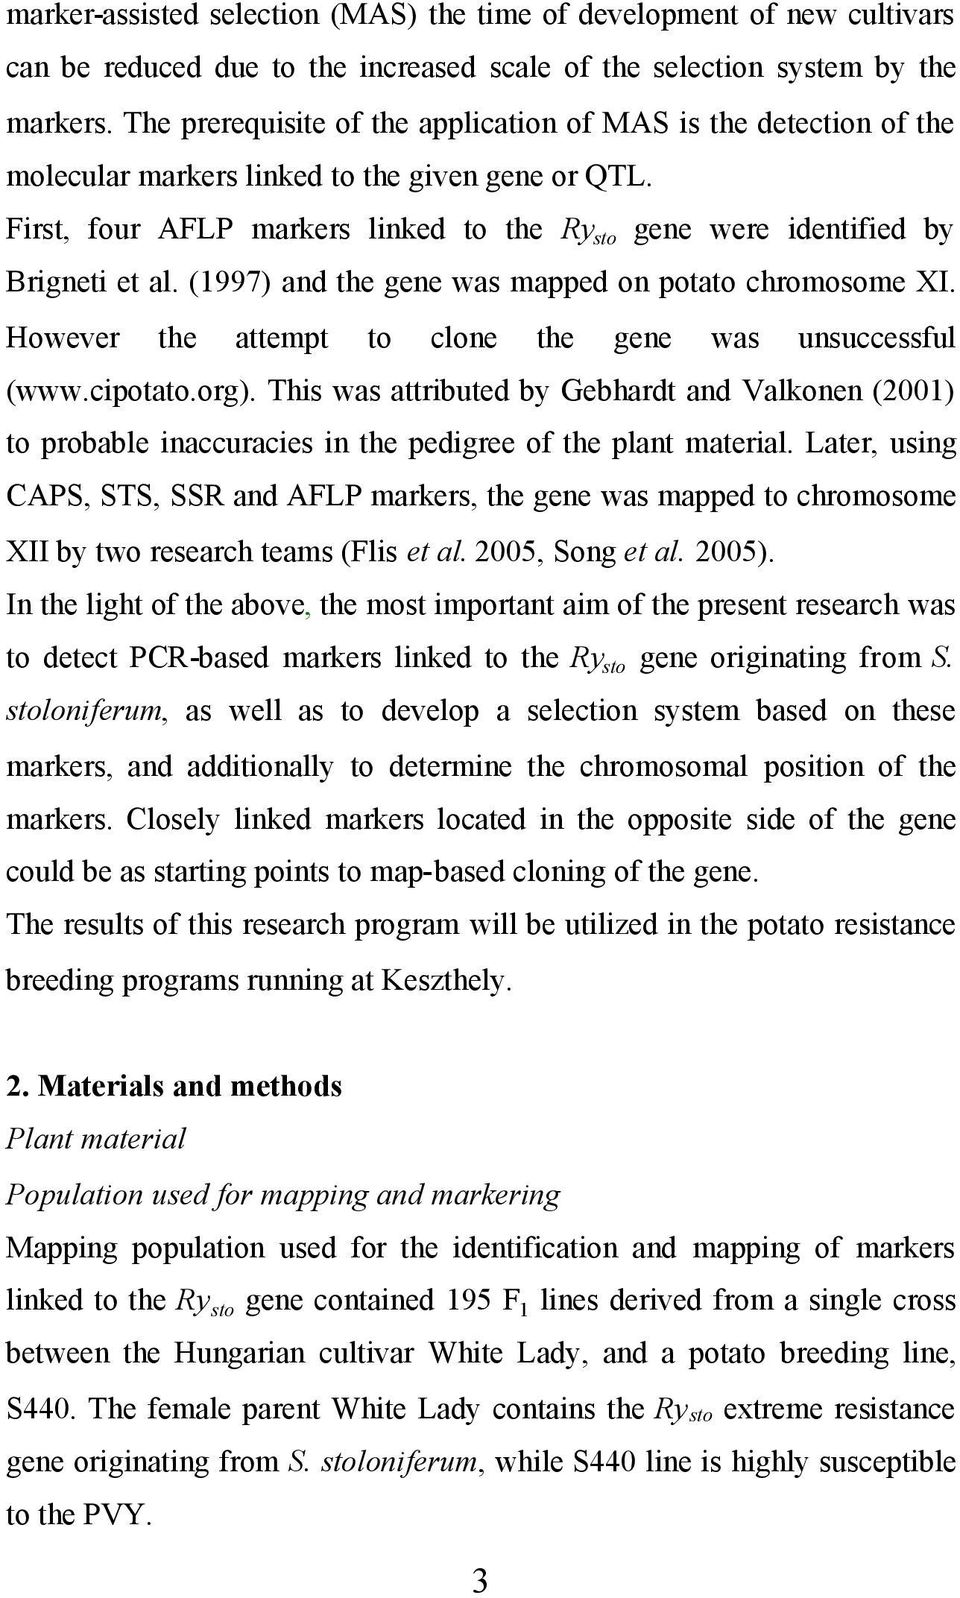 First, four AFLP markers linked to the Ry sto gene were identified by Brigneti et al. (1997) and the gene was mapped on potato chromosome XI.